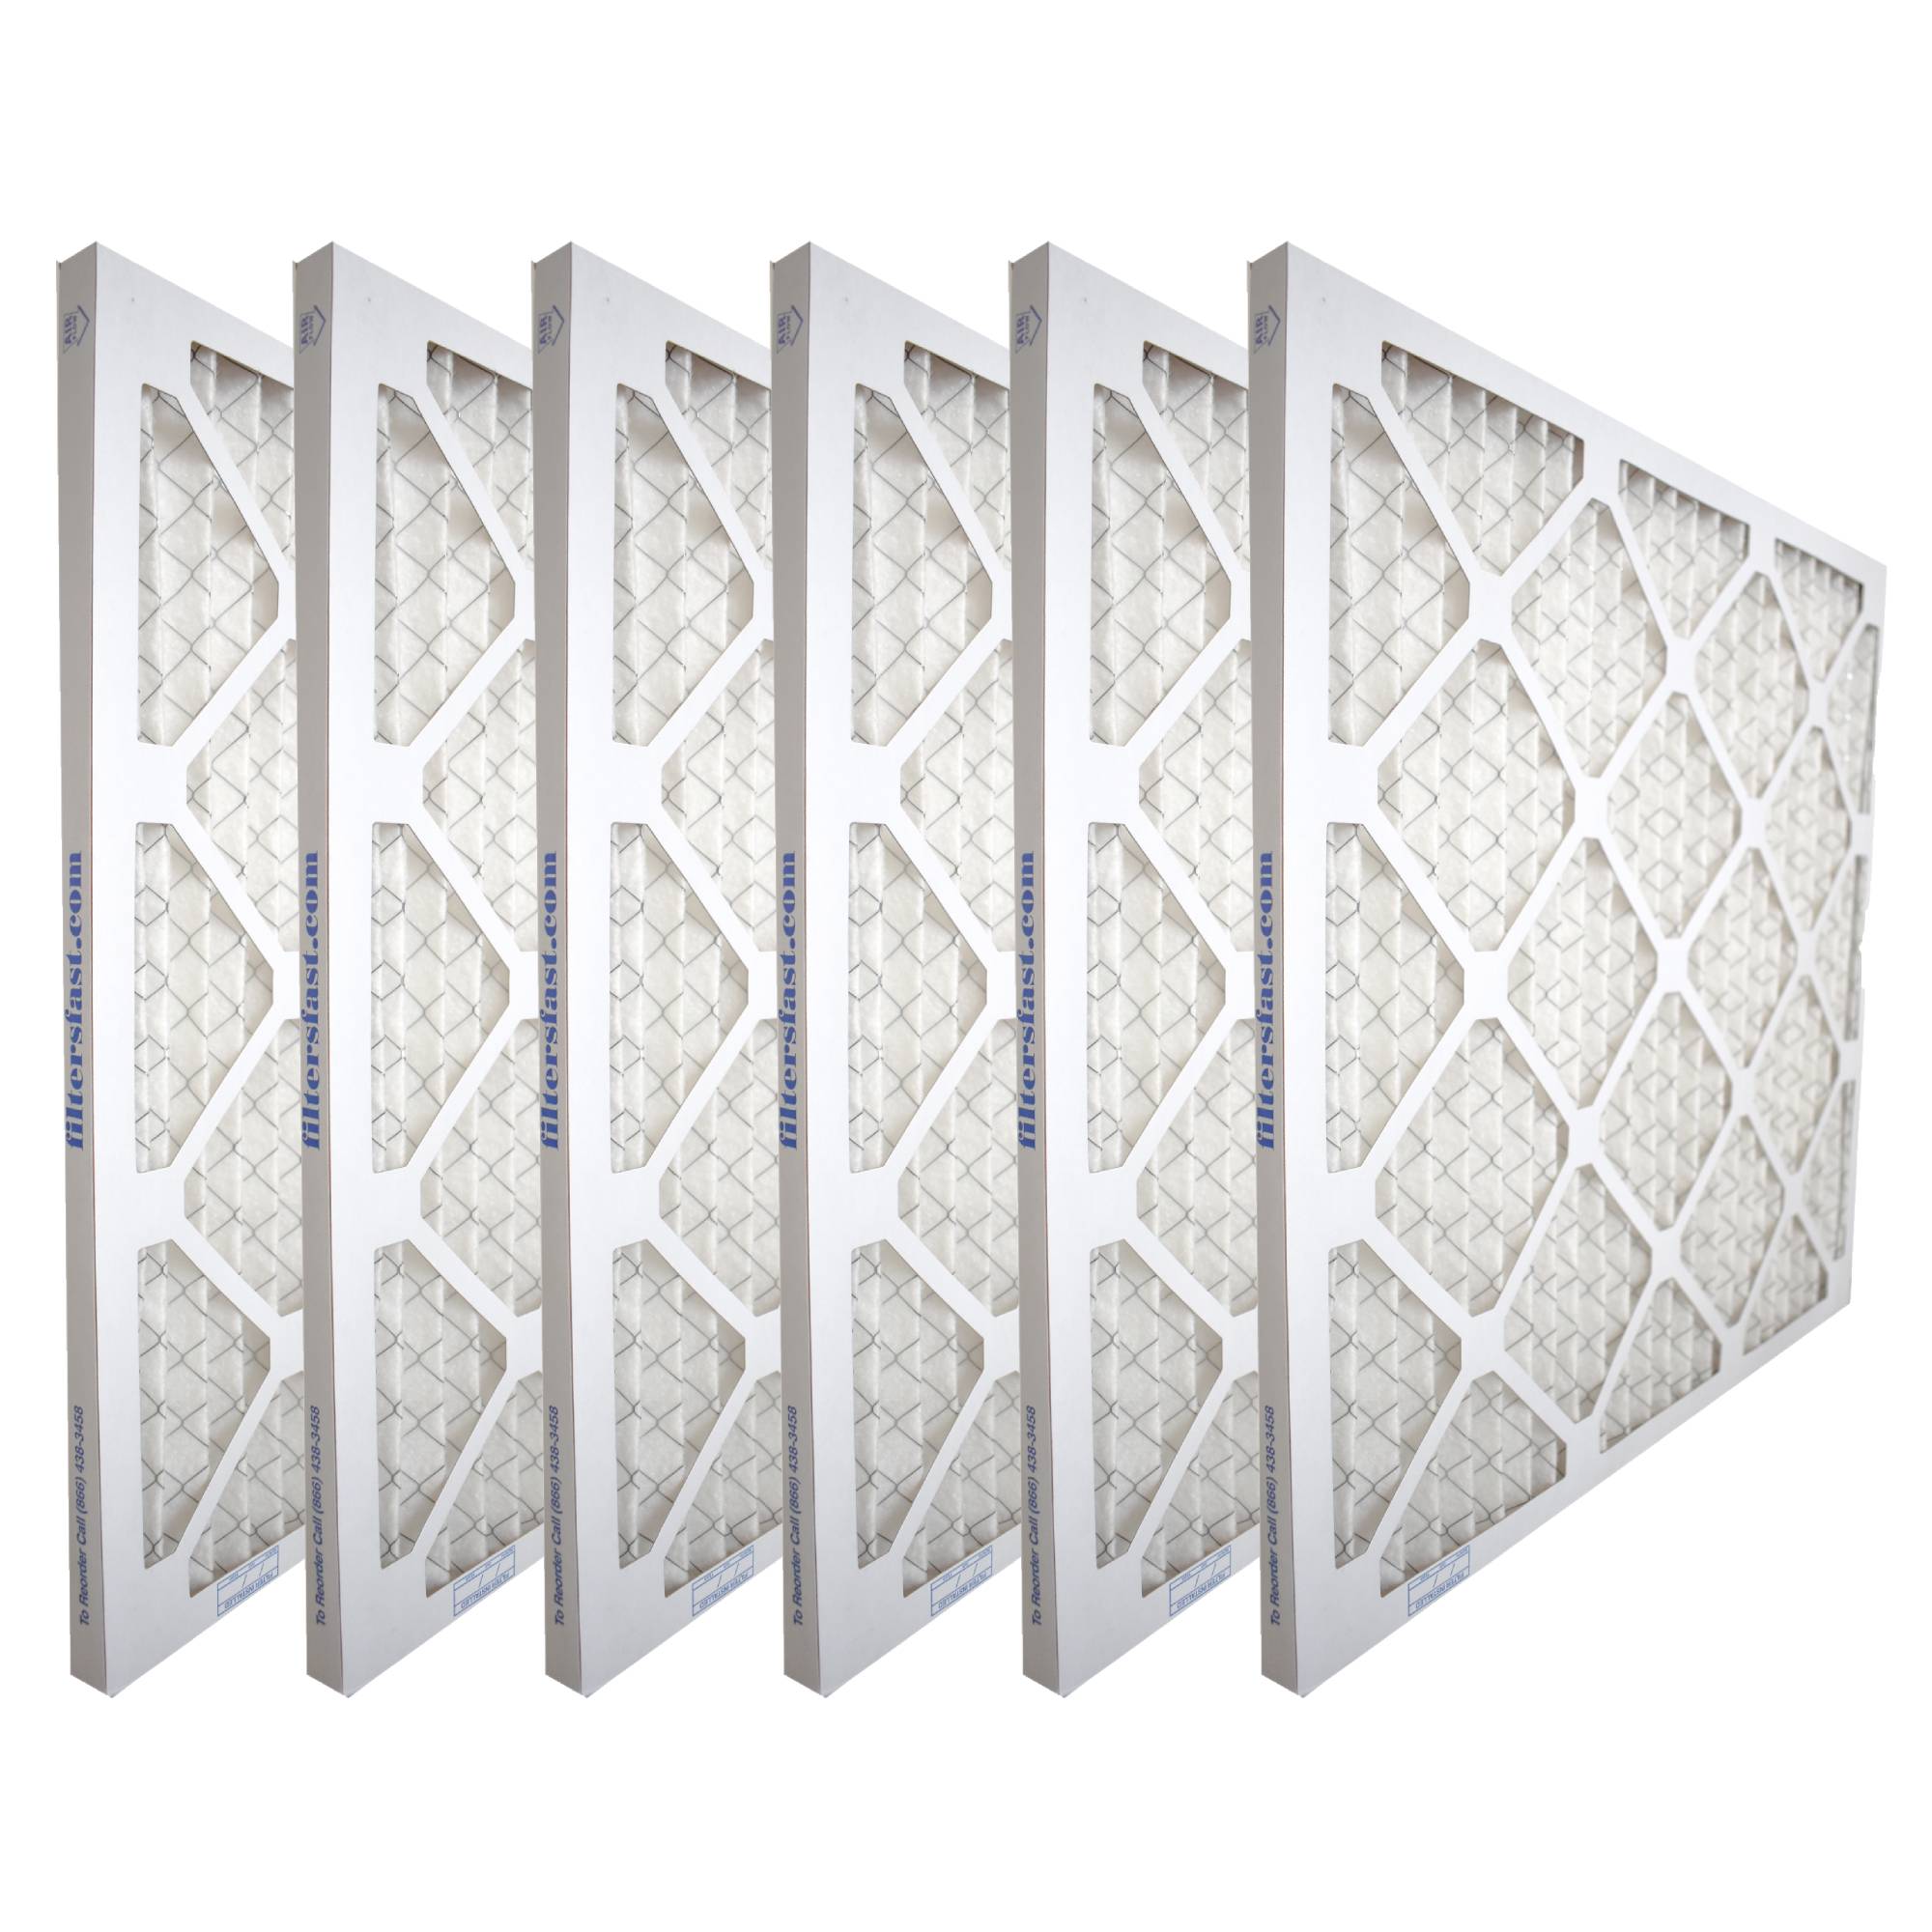 MERV 8 Filters Fast® 1" AC and Furnace Air Filters 6-Pack